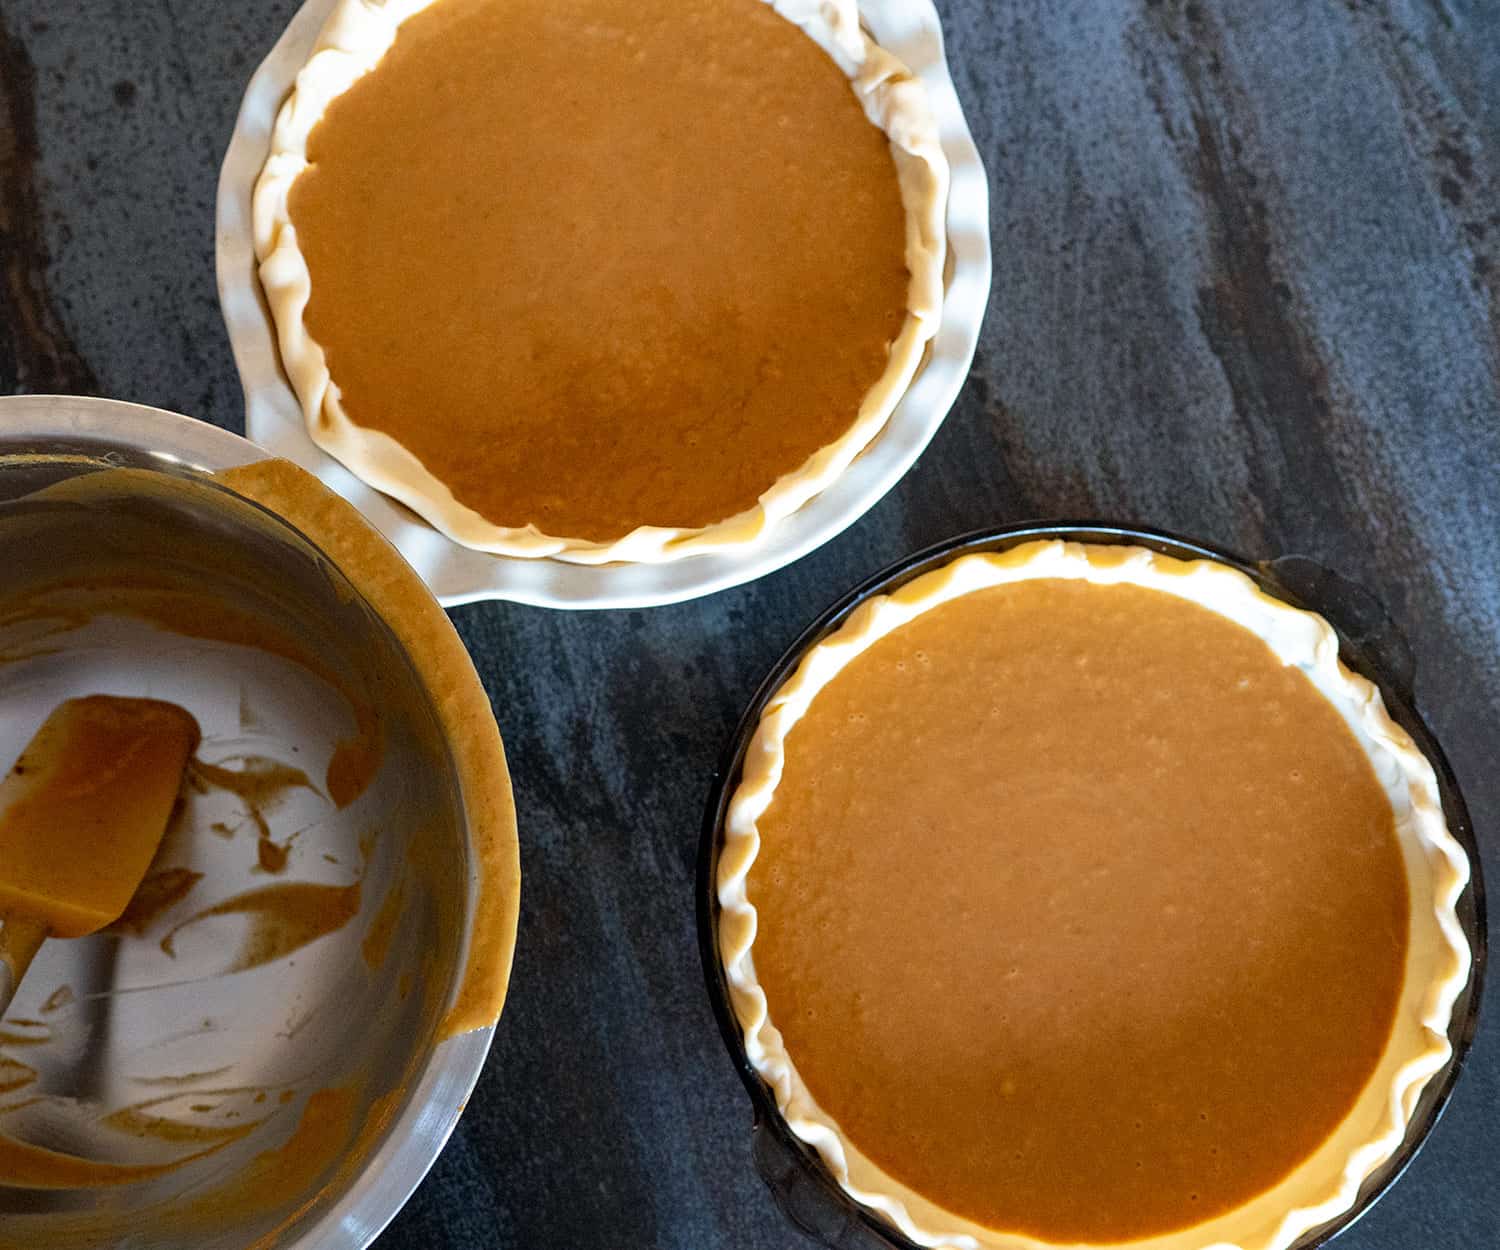 pies filled with pumpkin pie filling.